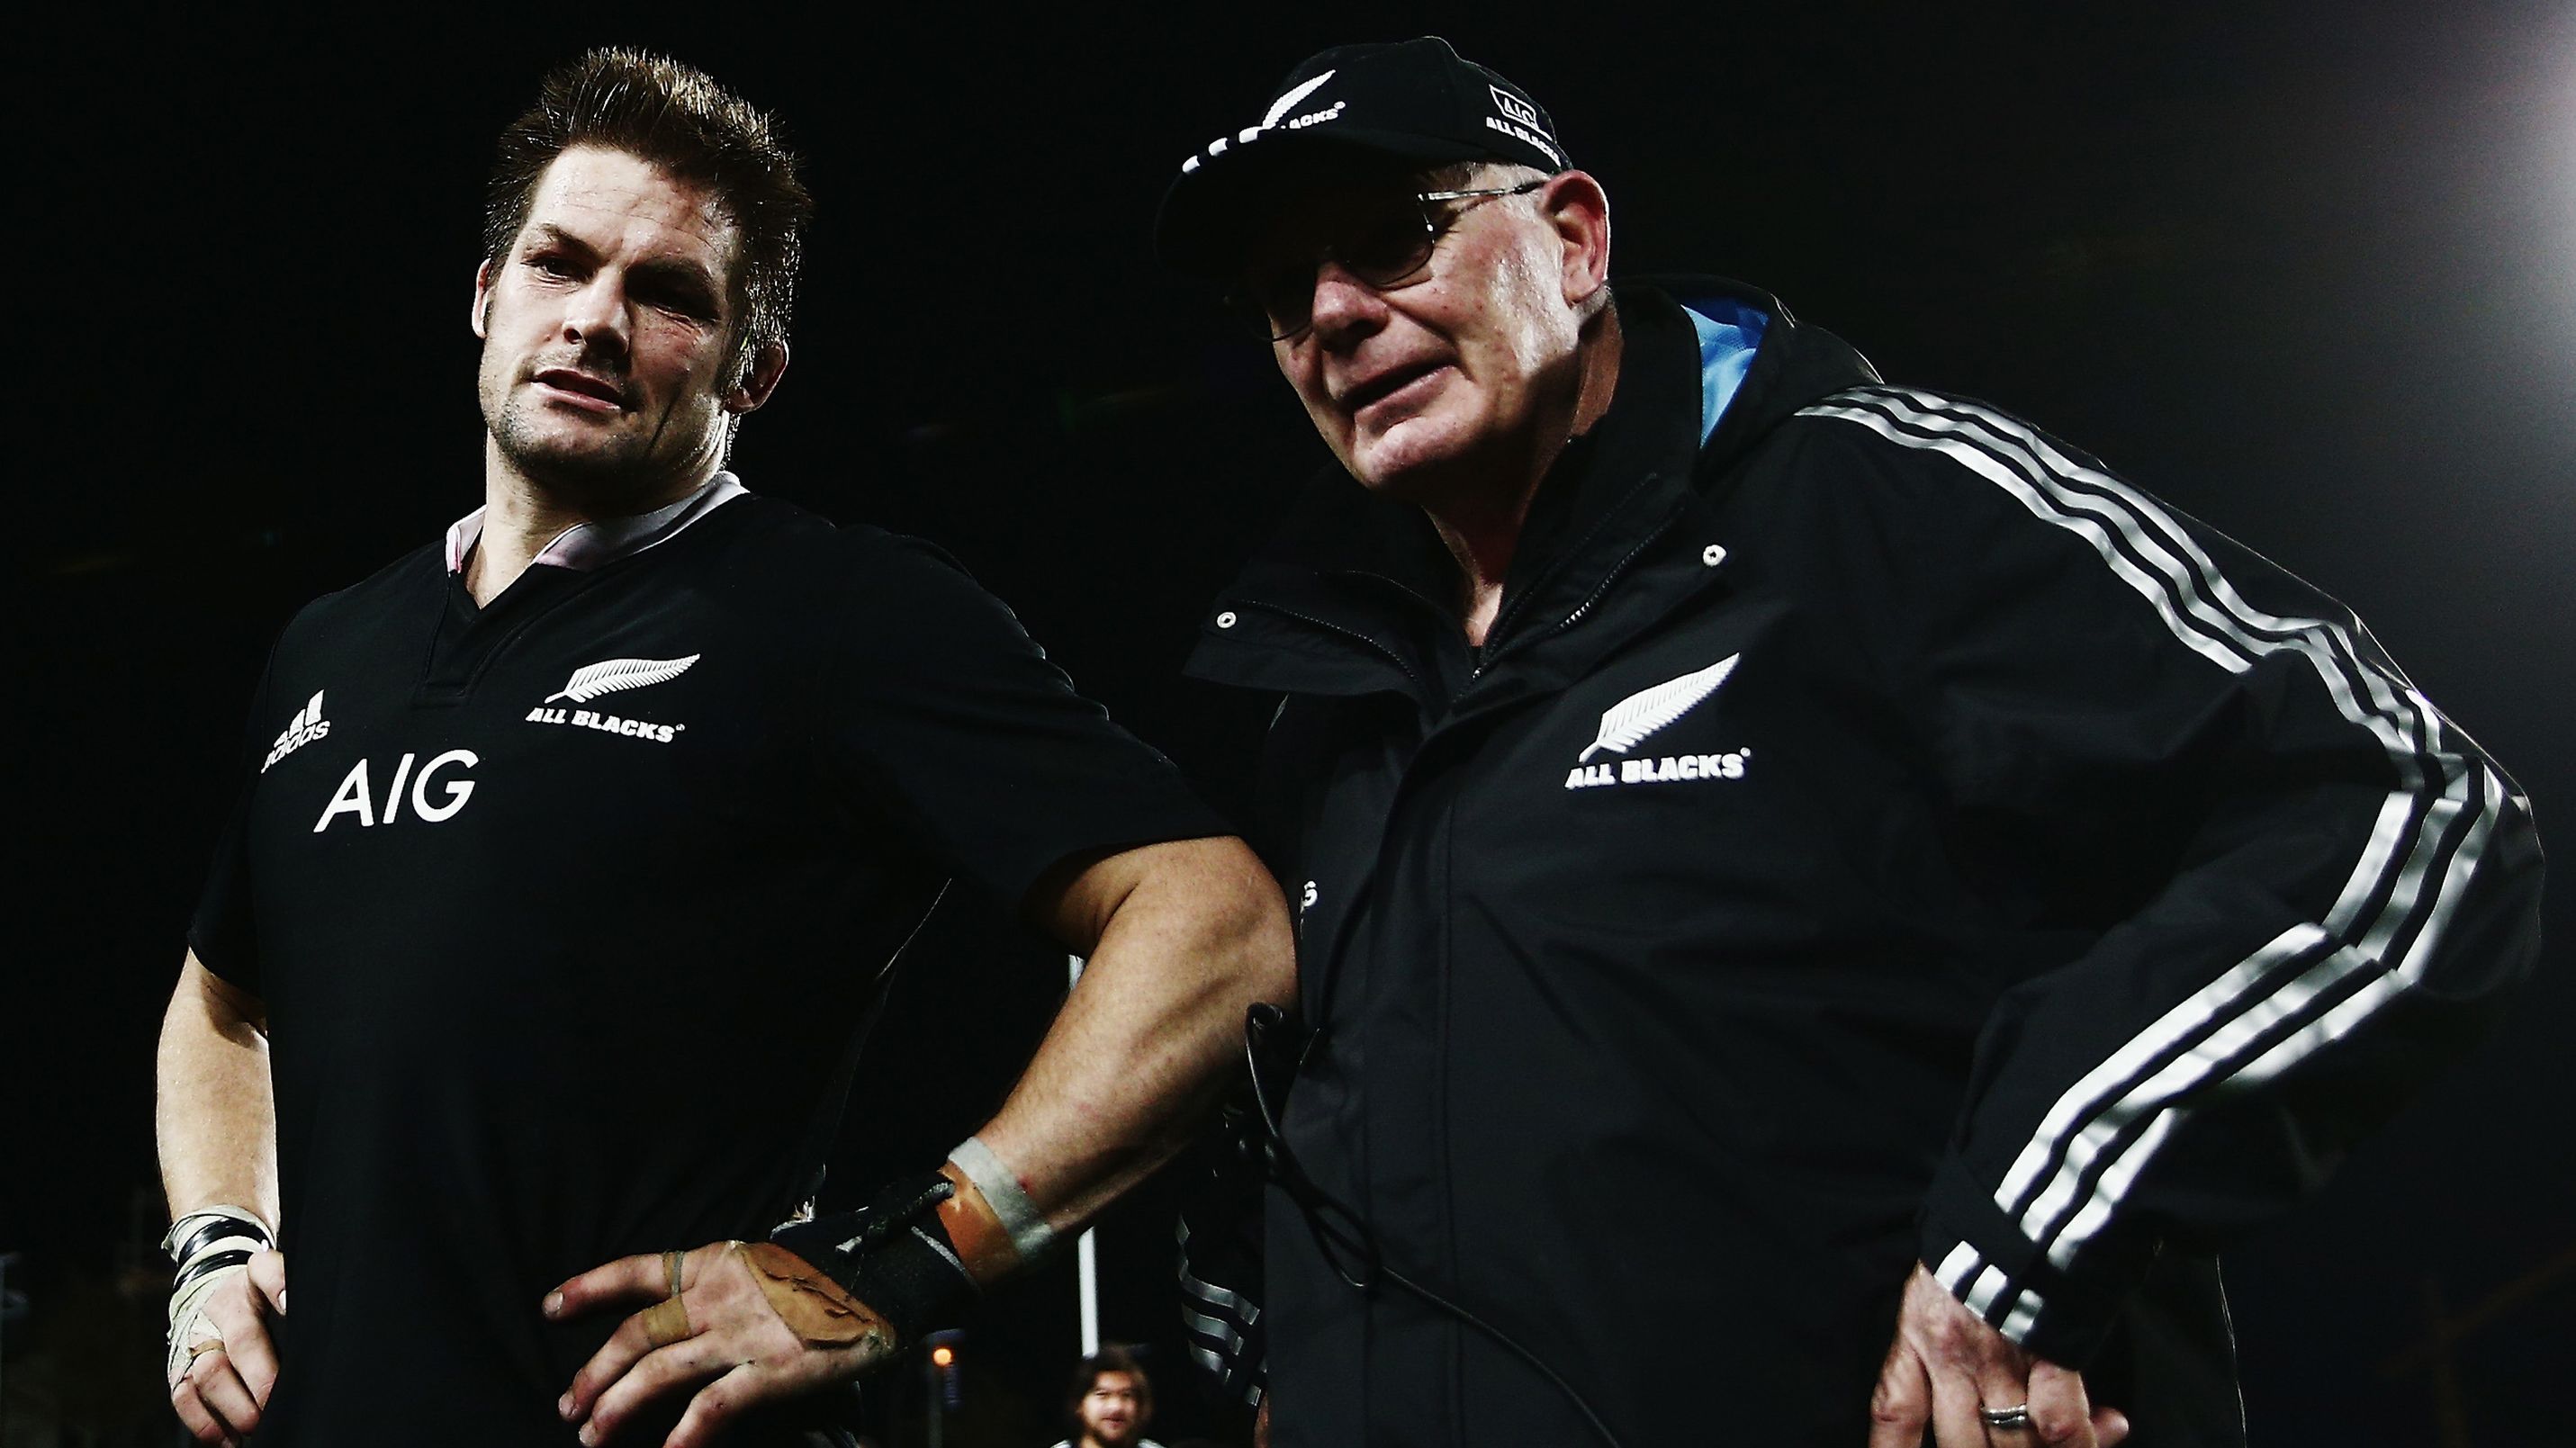 Richie McCaw and Mike Cron of the All Blacks in 2014.